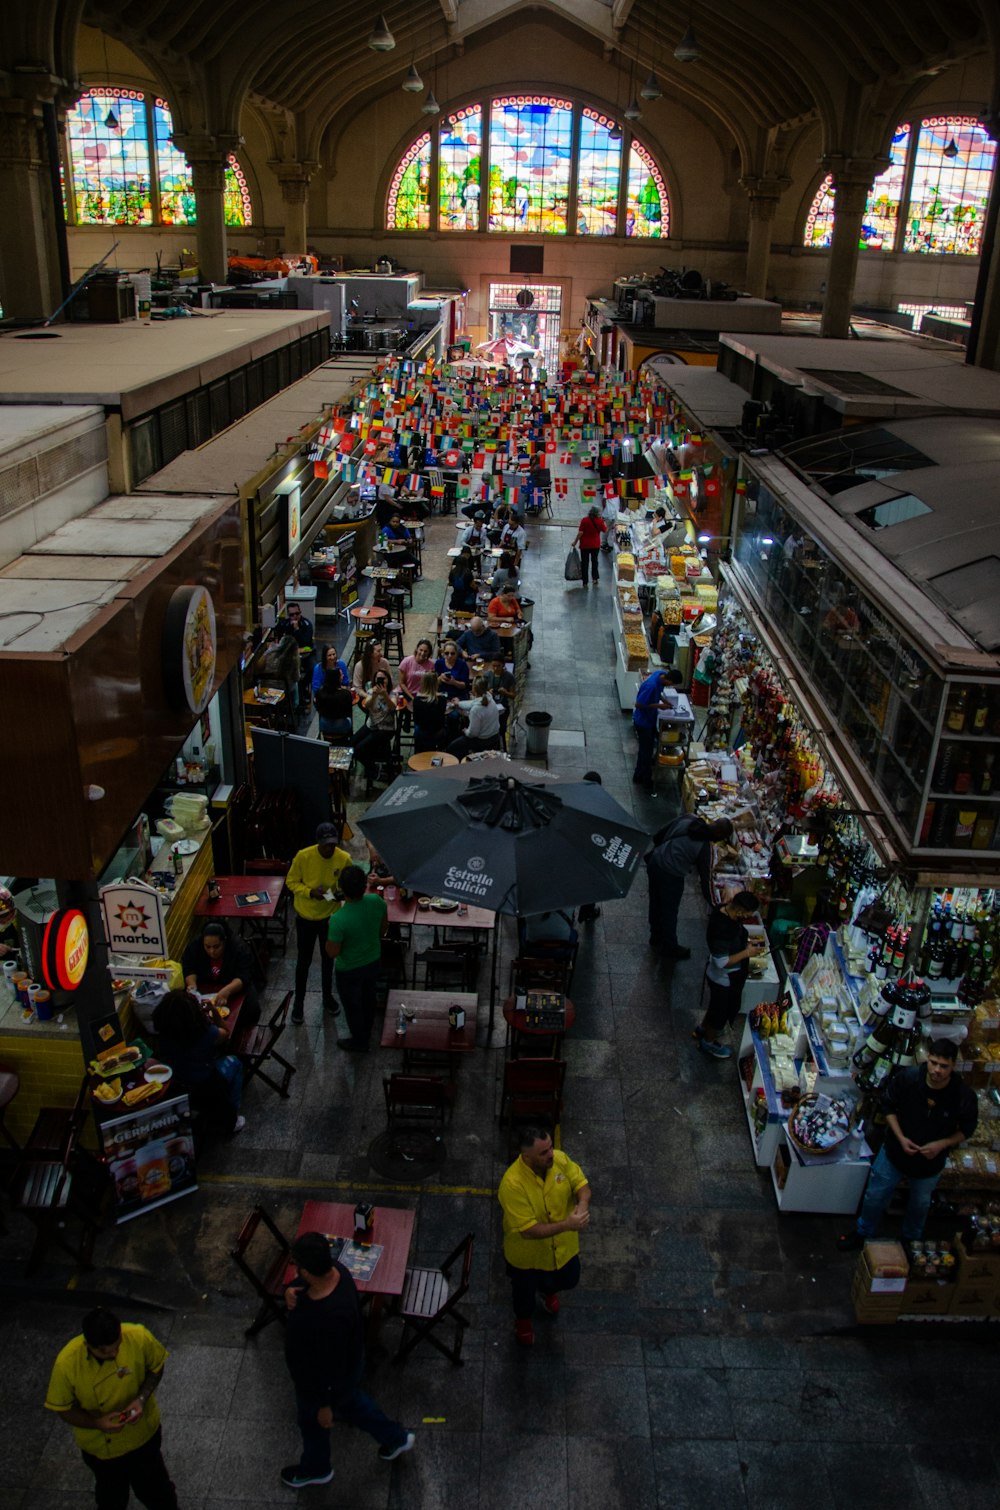 an overhead view of a market with people shopping